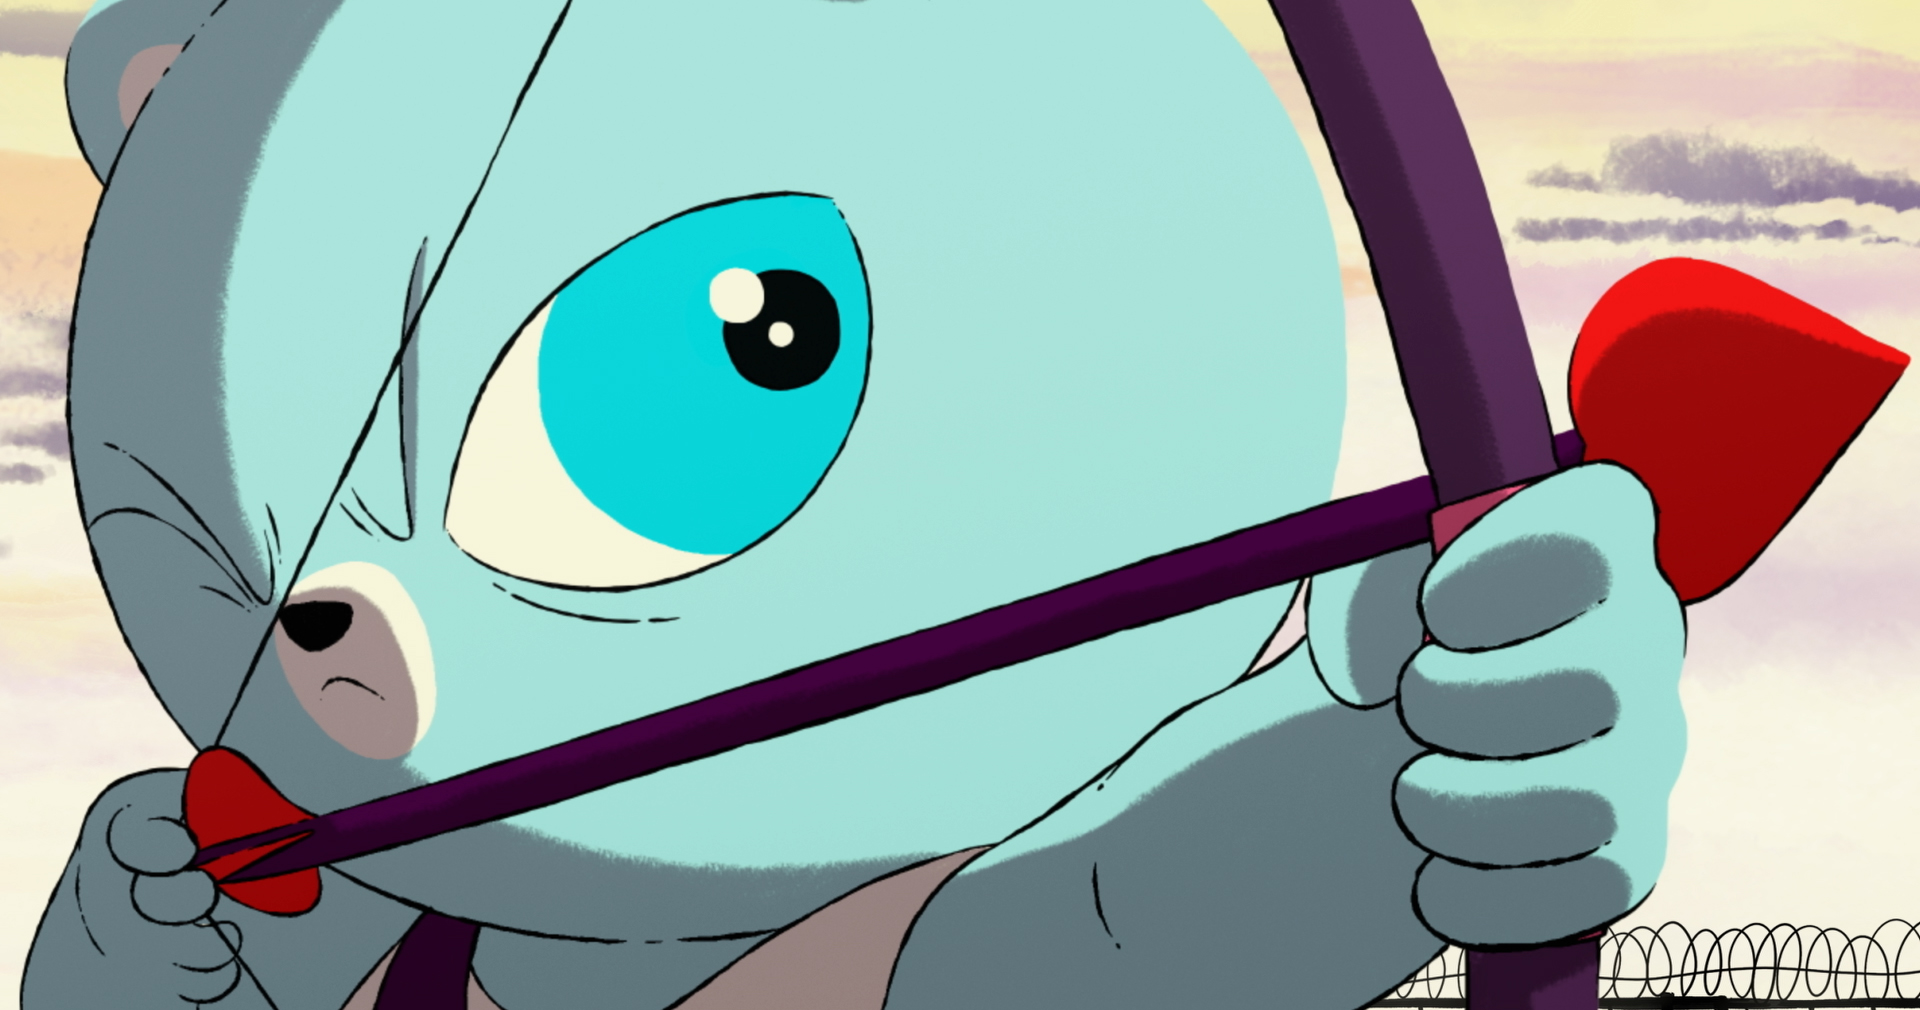 An extreme close-up of the eye and snout of Bluey, a true-to-his-name pastel blue teddy bear, as he glares at an offscreen target and aims a heart-shaped arrow in Unicorn Wars